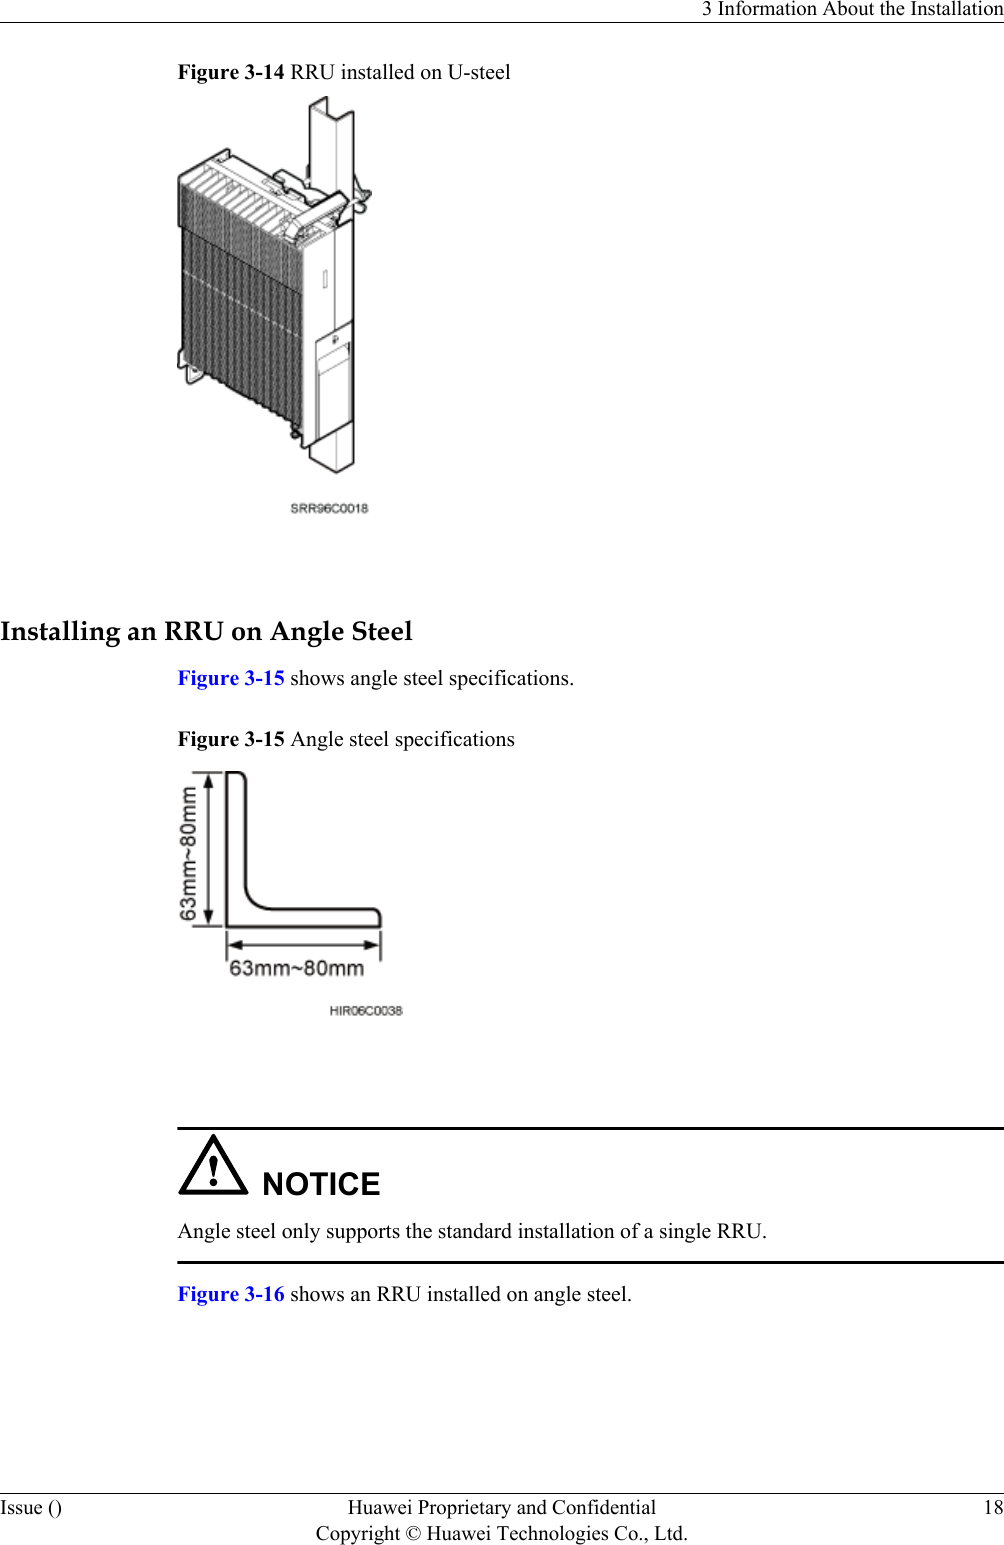 Figure 3-14 RRU installed on U-steel Installing an RRU on Angle SteelFigure 3-15 shows angle steel specifications.Figure 3-15 Angle steel specifications NOTICEAngle steel only supports the standard installation of a single RRU.Figure 3-16 shows an RRU installed on angle steel.3 Information About the InstallationIssue () Huawei Proprietary and ConfidentialCopyright © Huawei Technologies Co., Ltd.18